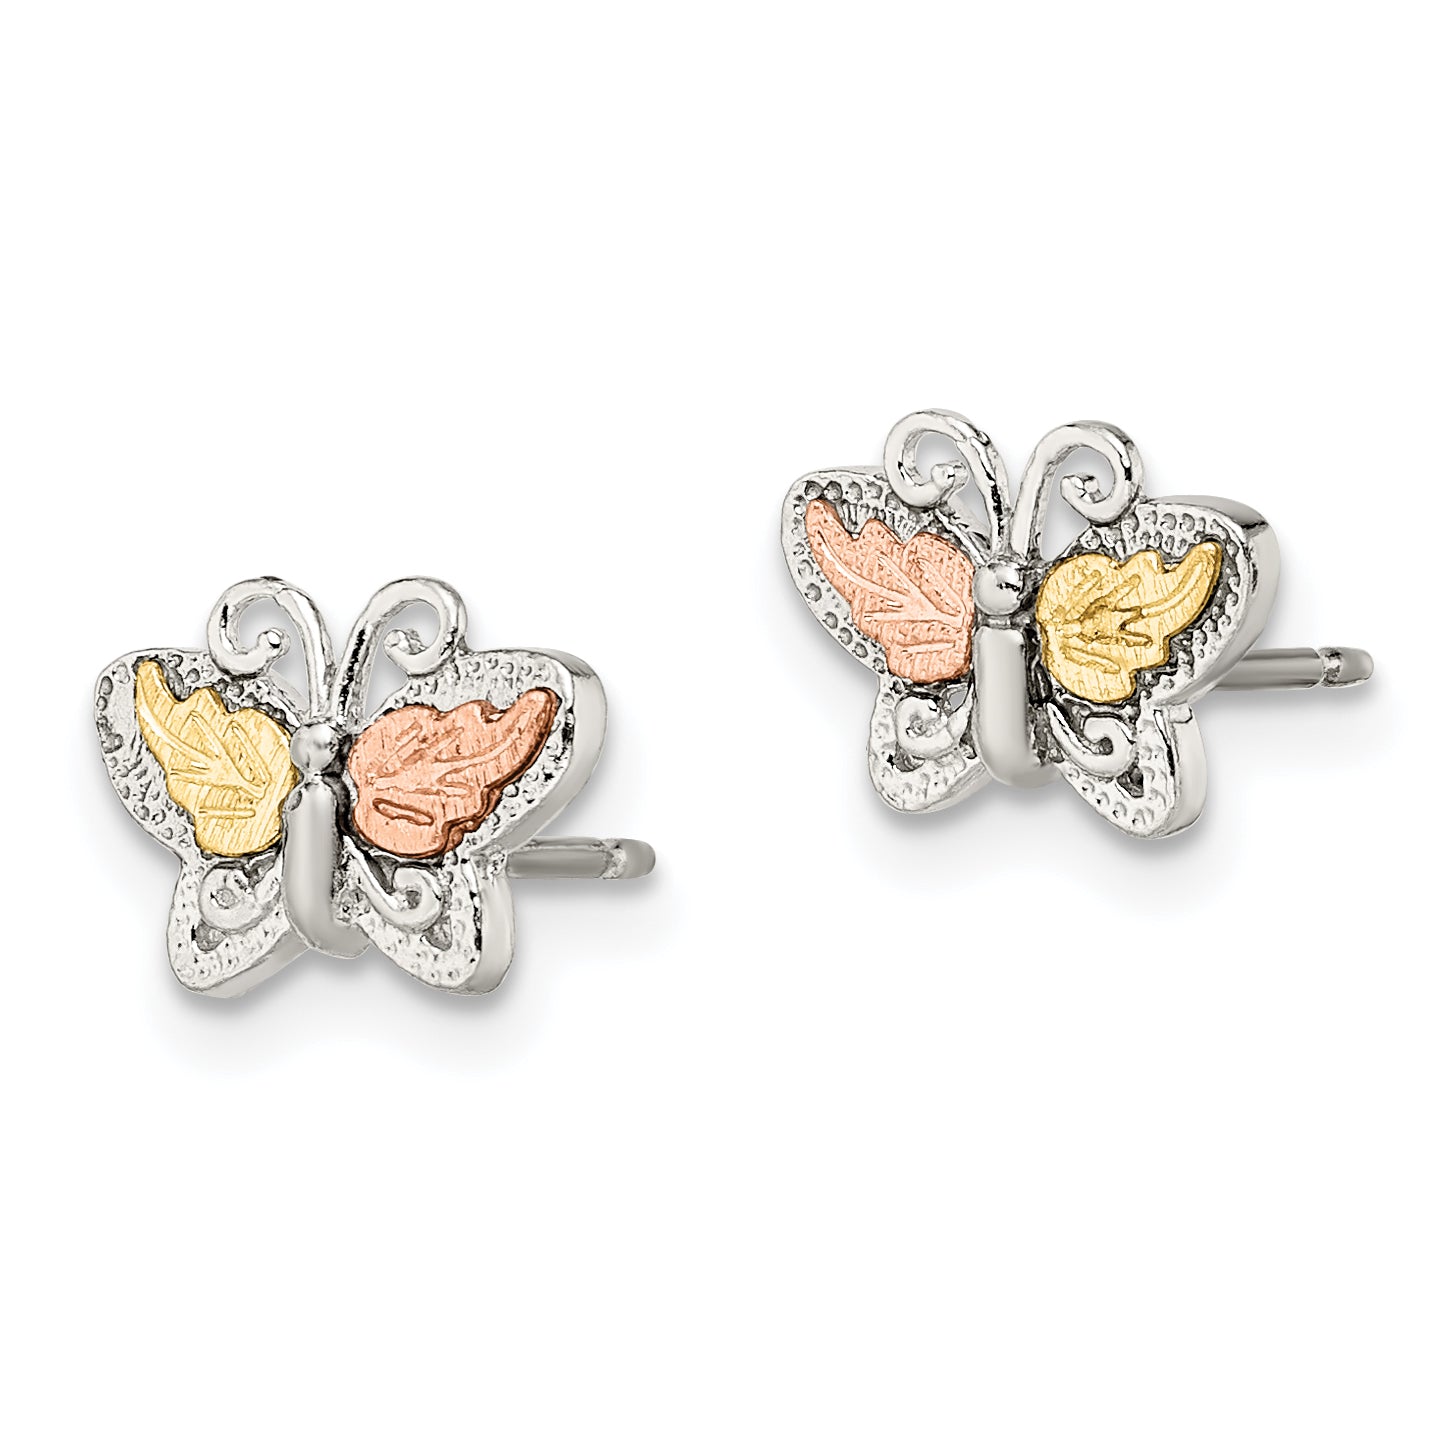 Landstrom's Mt. Rushmore Black Hills Sterling Silver 12K Gold Accents Butterfly Post Stud Earrings